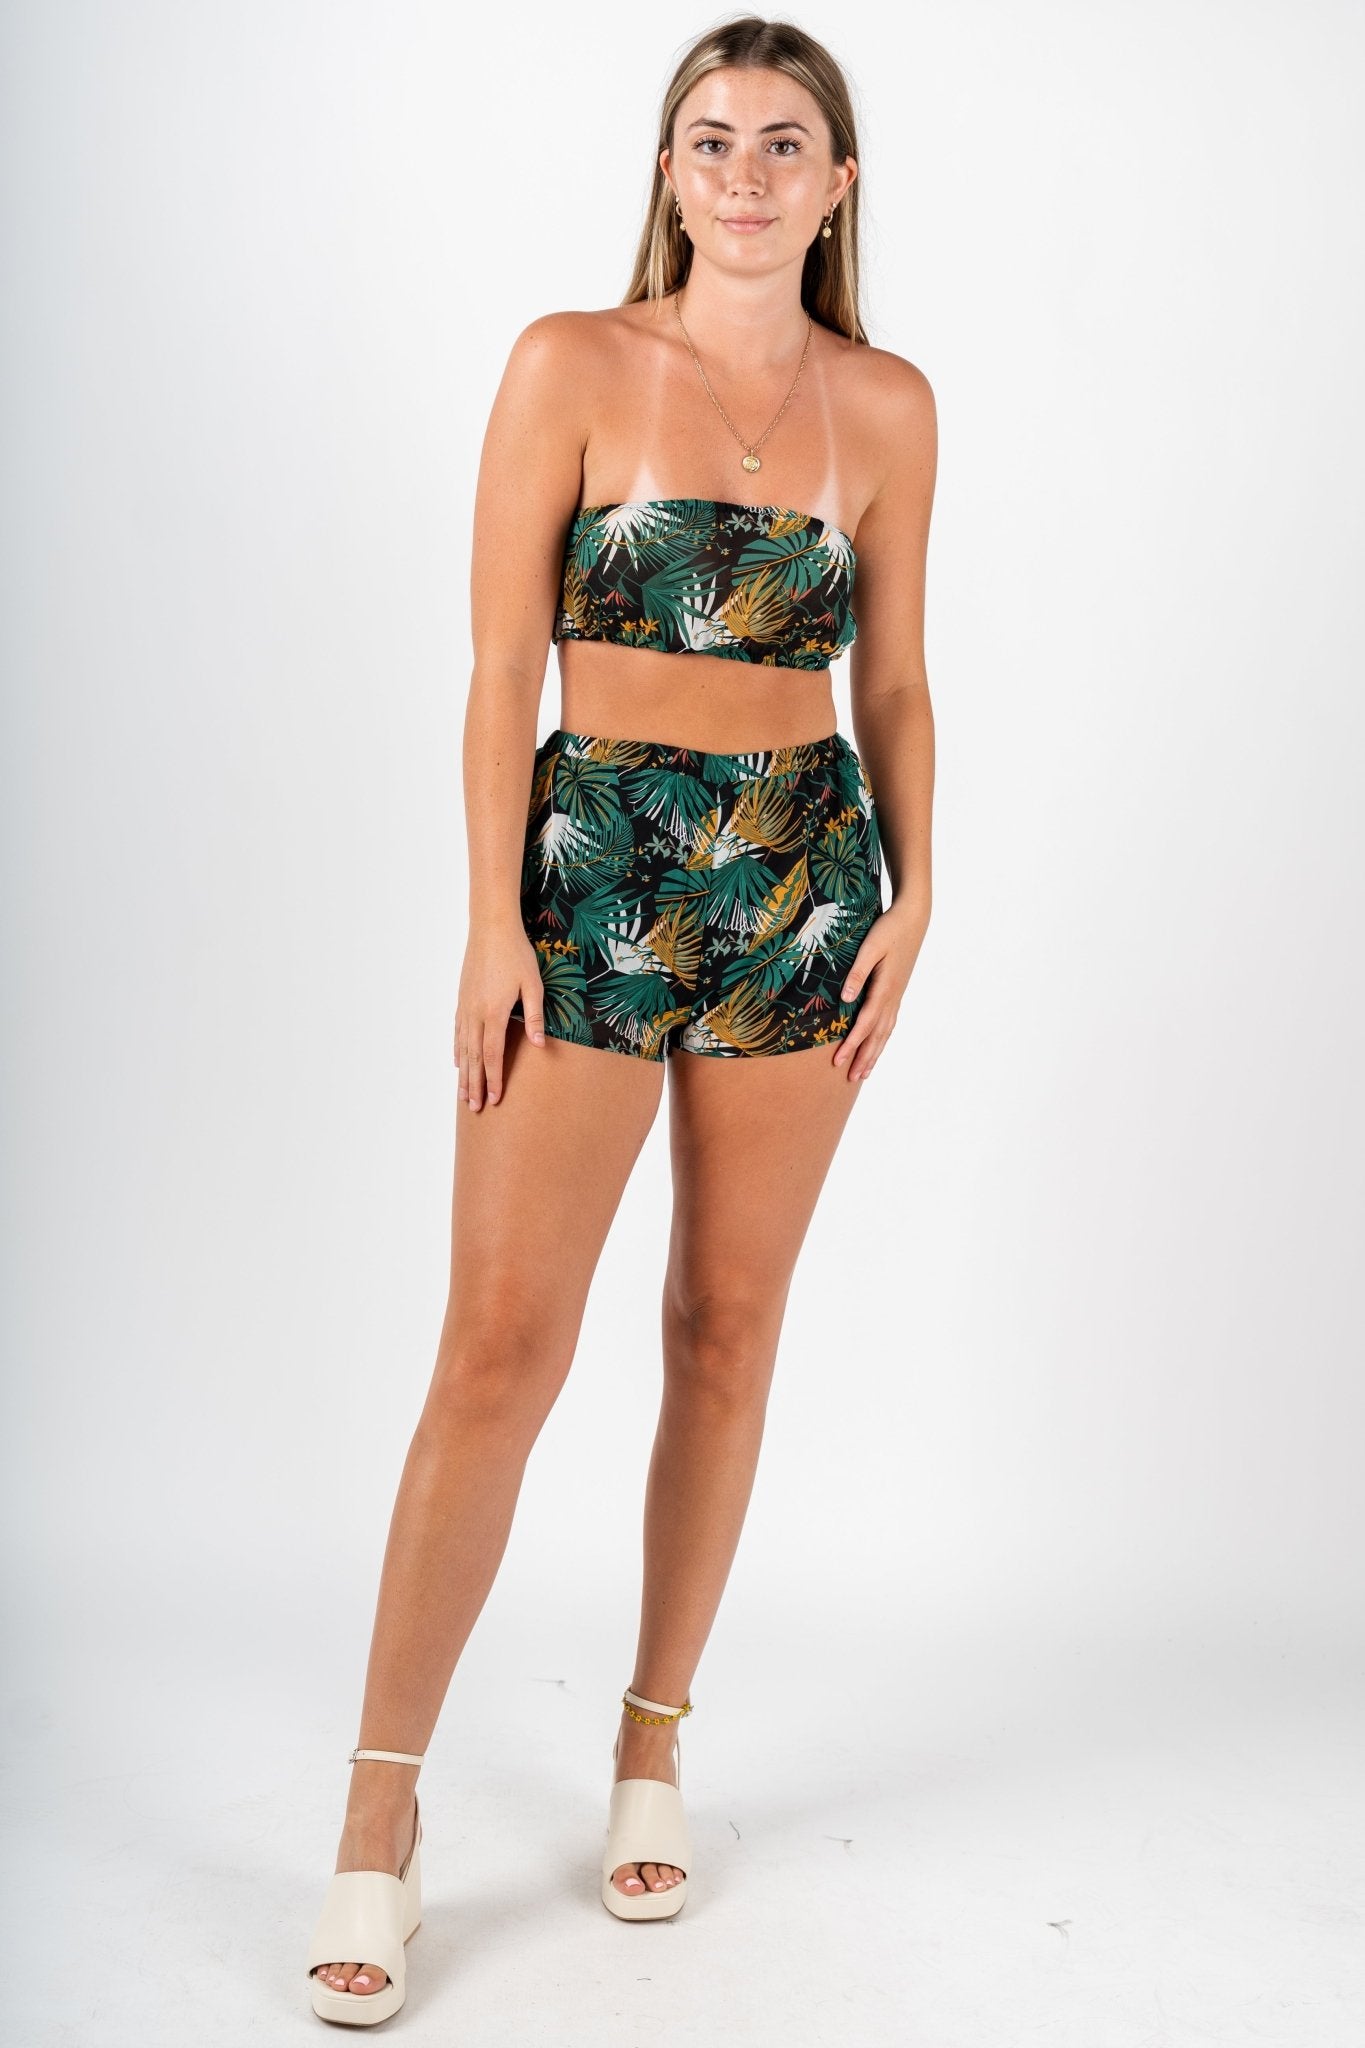 Tropical bandeau top black - Stylish Top - Trendy Staycation Outfits at Lush Fashion Lounge Boutique in Oklahoma City